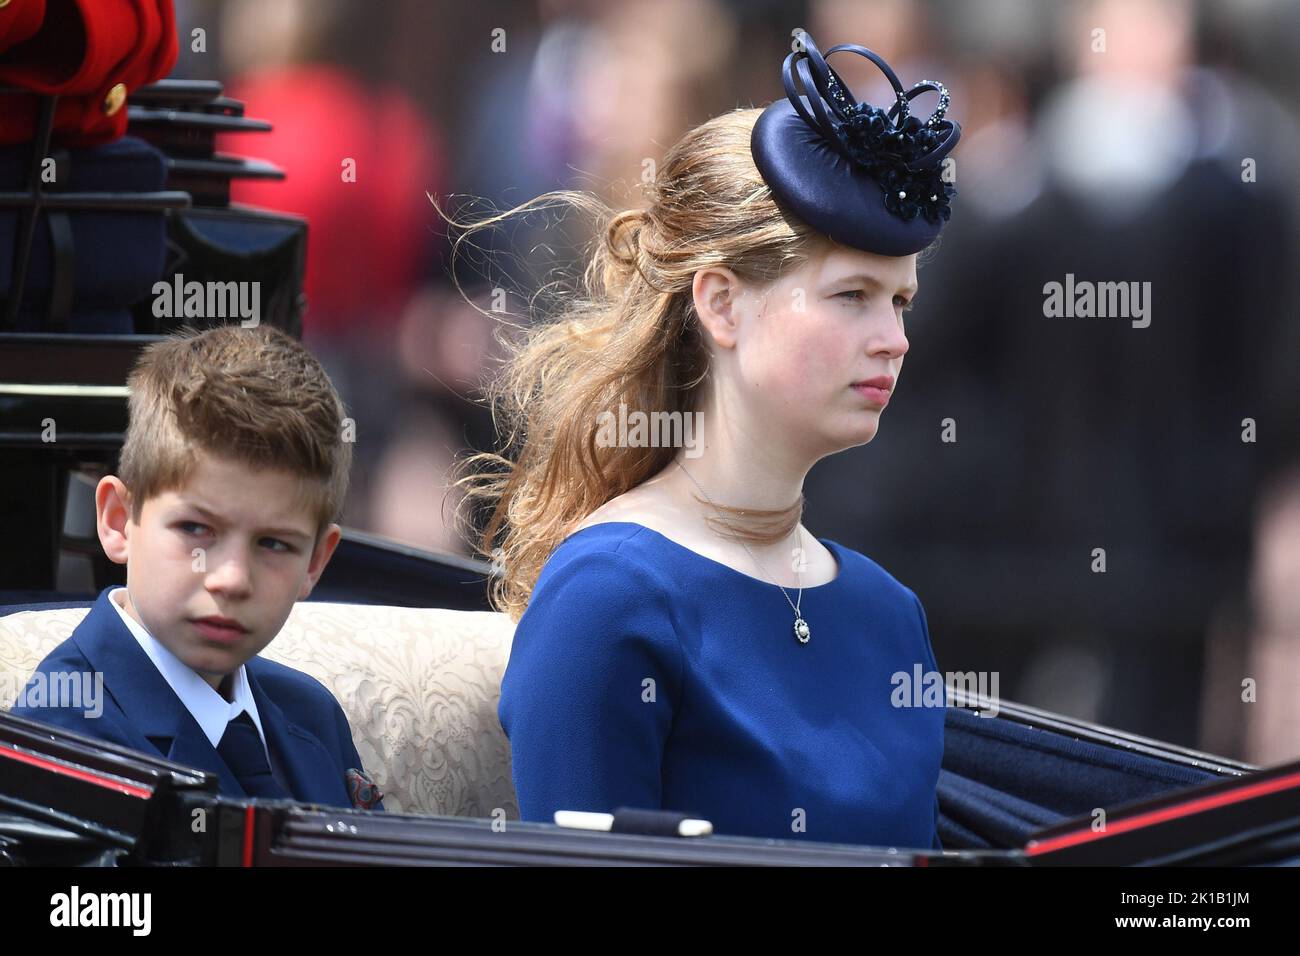 File photo dated 08/06/19 of Viscount Severn and Lady Louise Windsor make their way along The Mall to Buckingham Palace, in London, after the Trooping the Colour ceremony, as Queen Elizabeth II celebrates her official birthday. The late monarch had eight grandchildren, who are performing a vigil around her coffin on Saturday, and 12 great-grandchildren. The Queen was grandmother to eight grandchildren, who all held a deep respect and admiration for their Granny. Peter Phillips, Zara Tindall, the Prince of Wales, the Duke of Sussex, Princess Beatrice, Princess Eugenie, Lady Louise Windsor and V Stock Photo